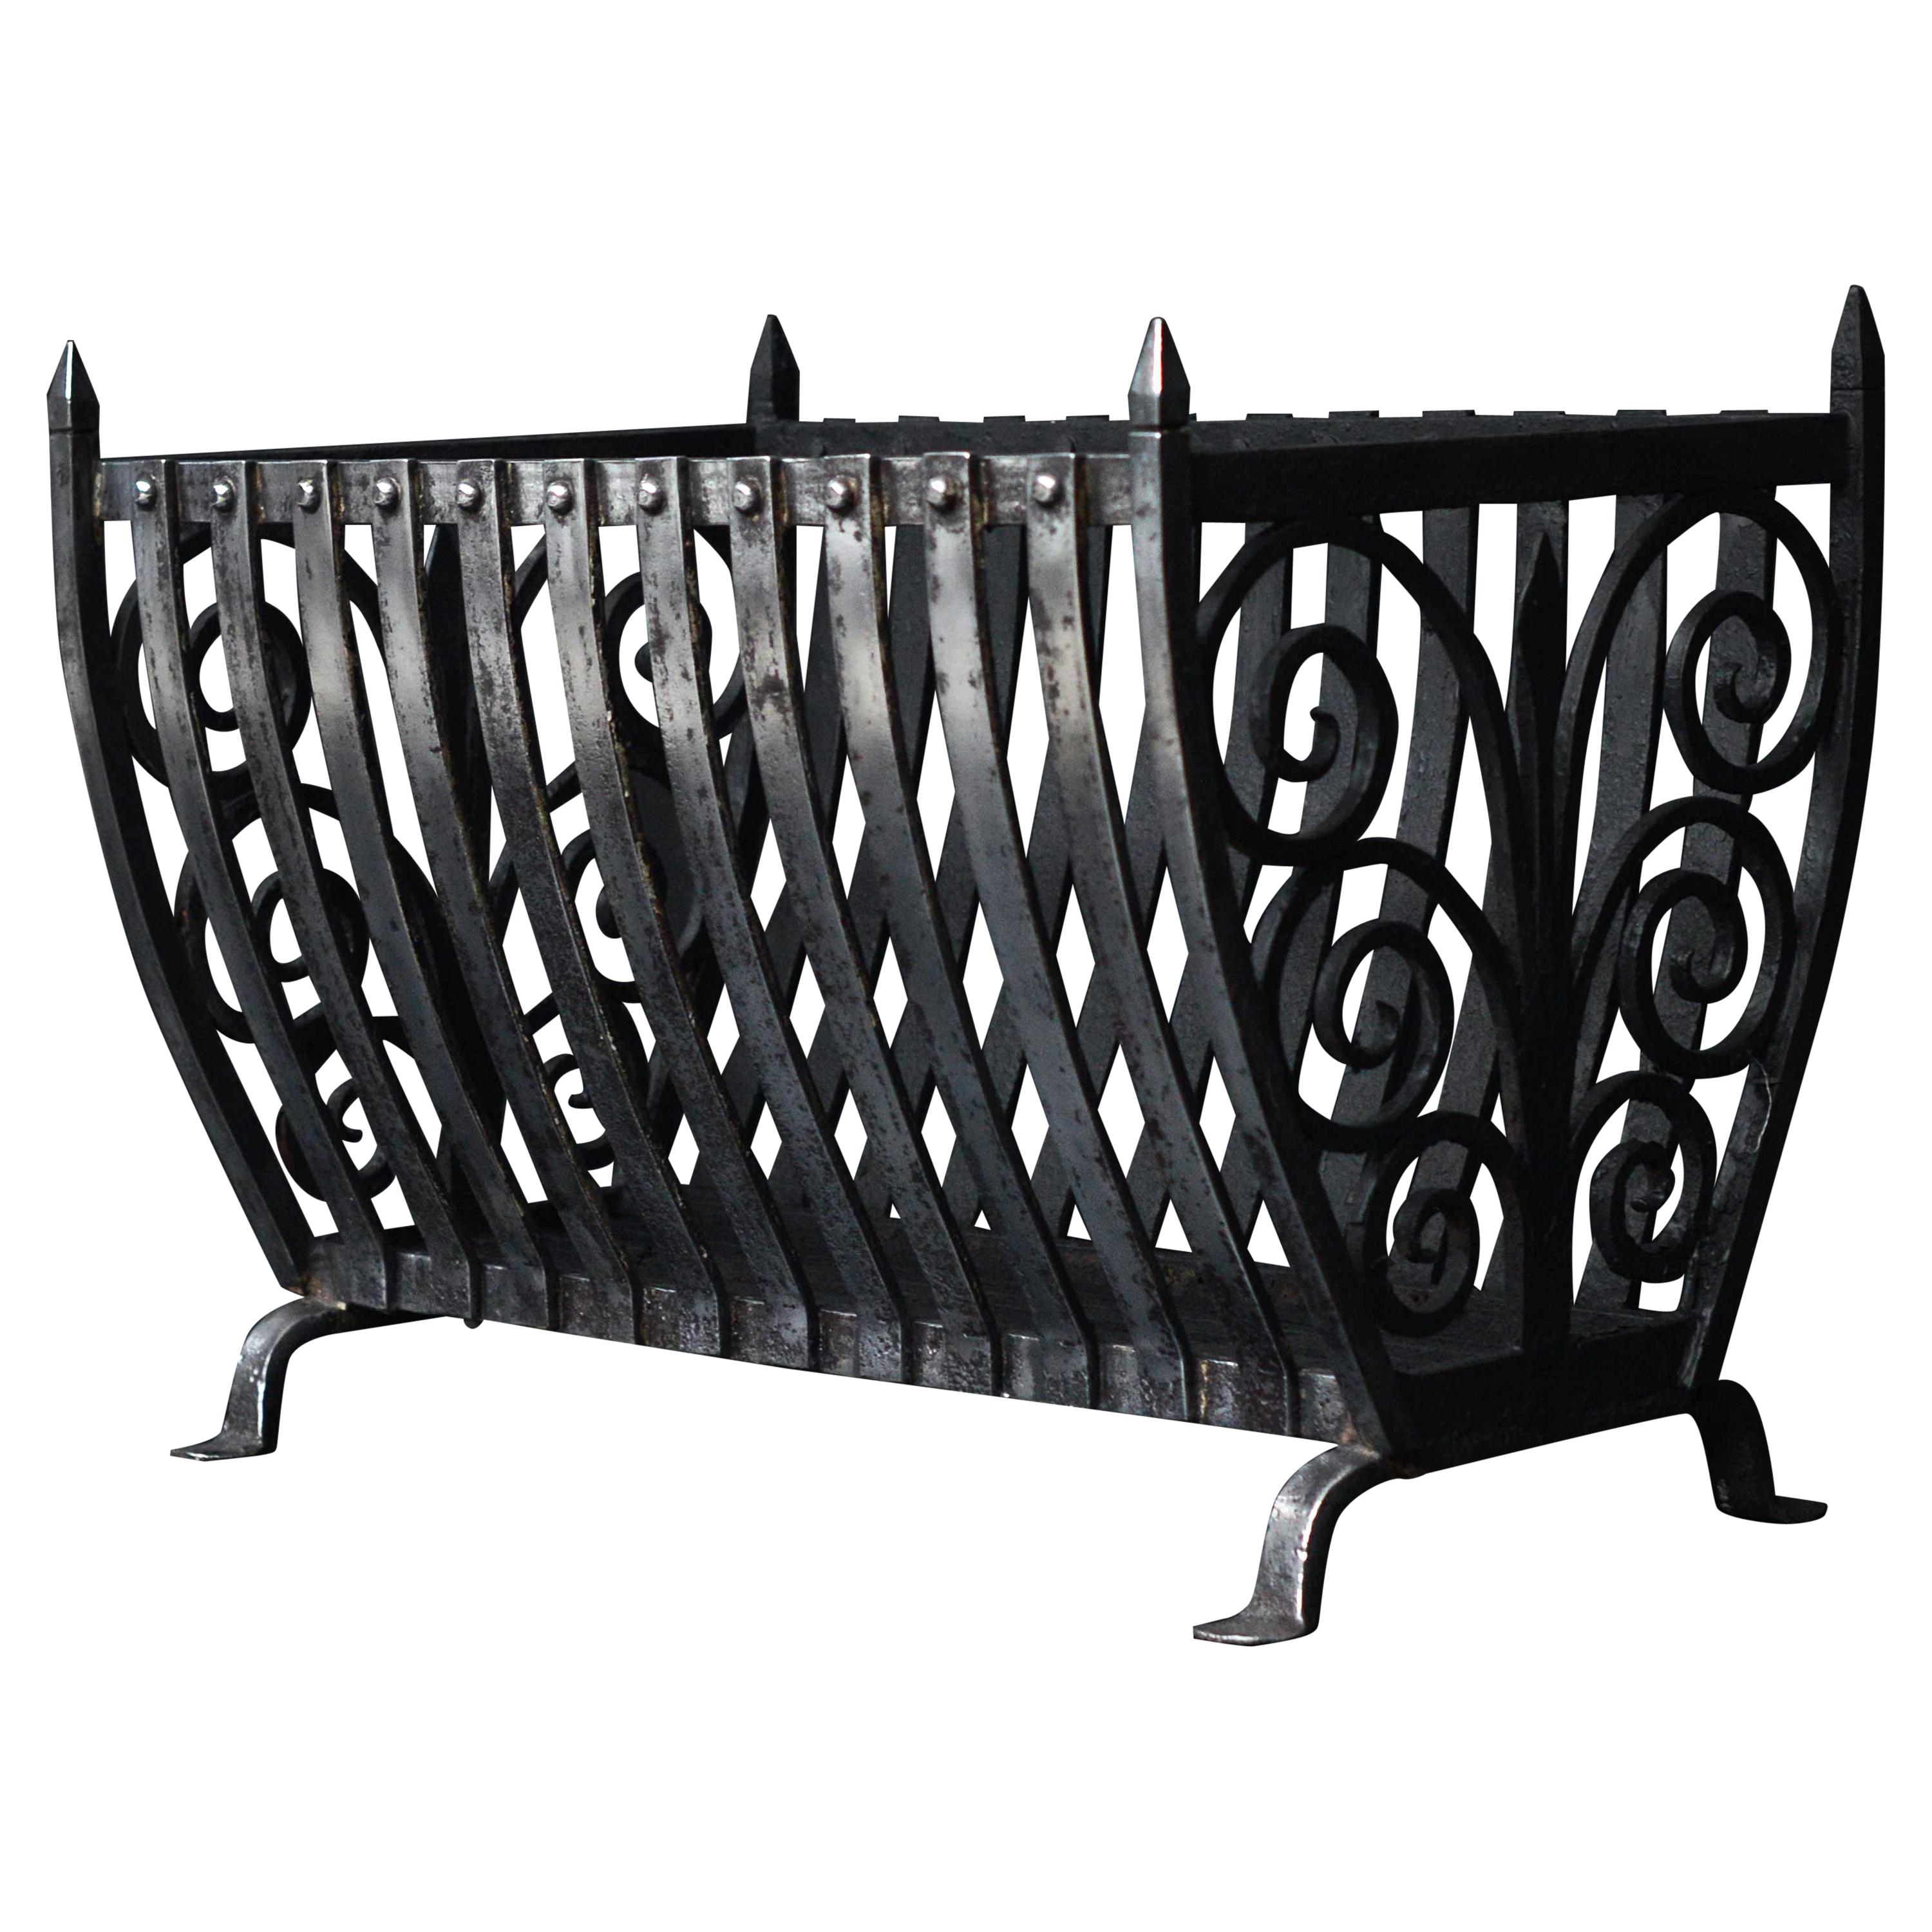 Polished Wrought Iron Firebasket For Sale